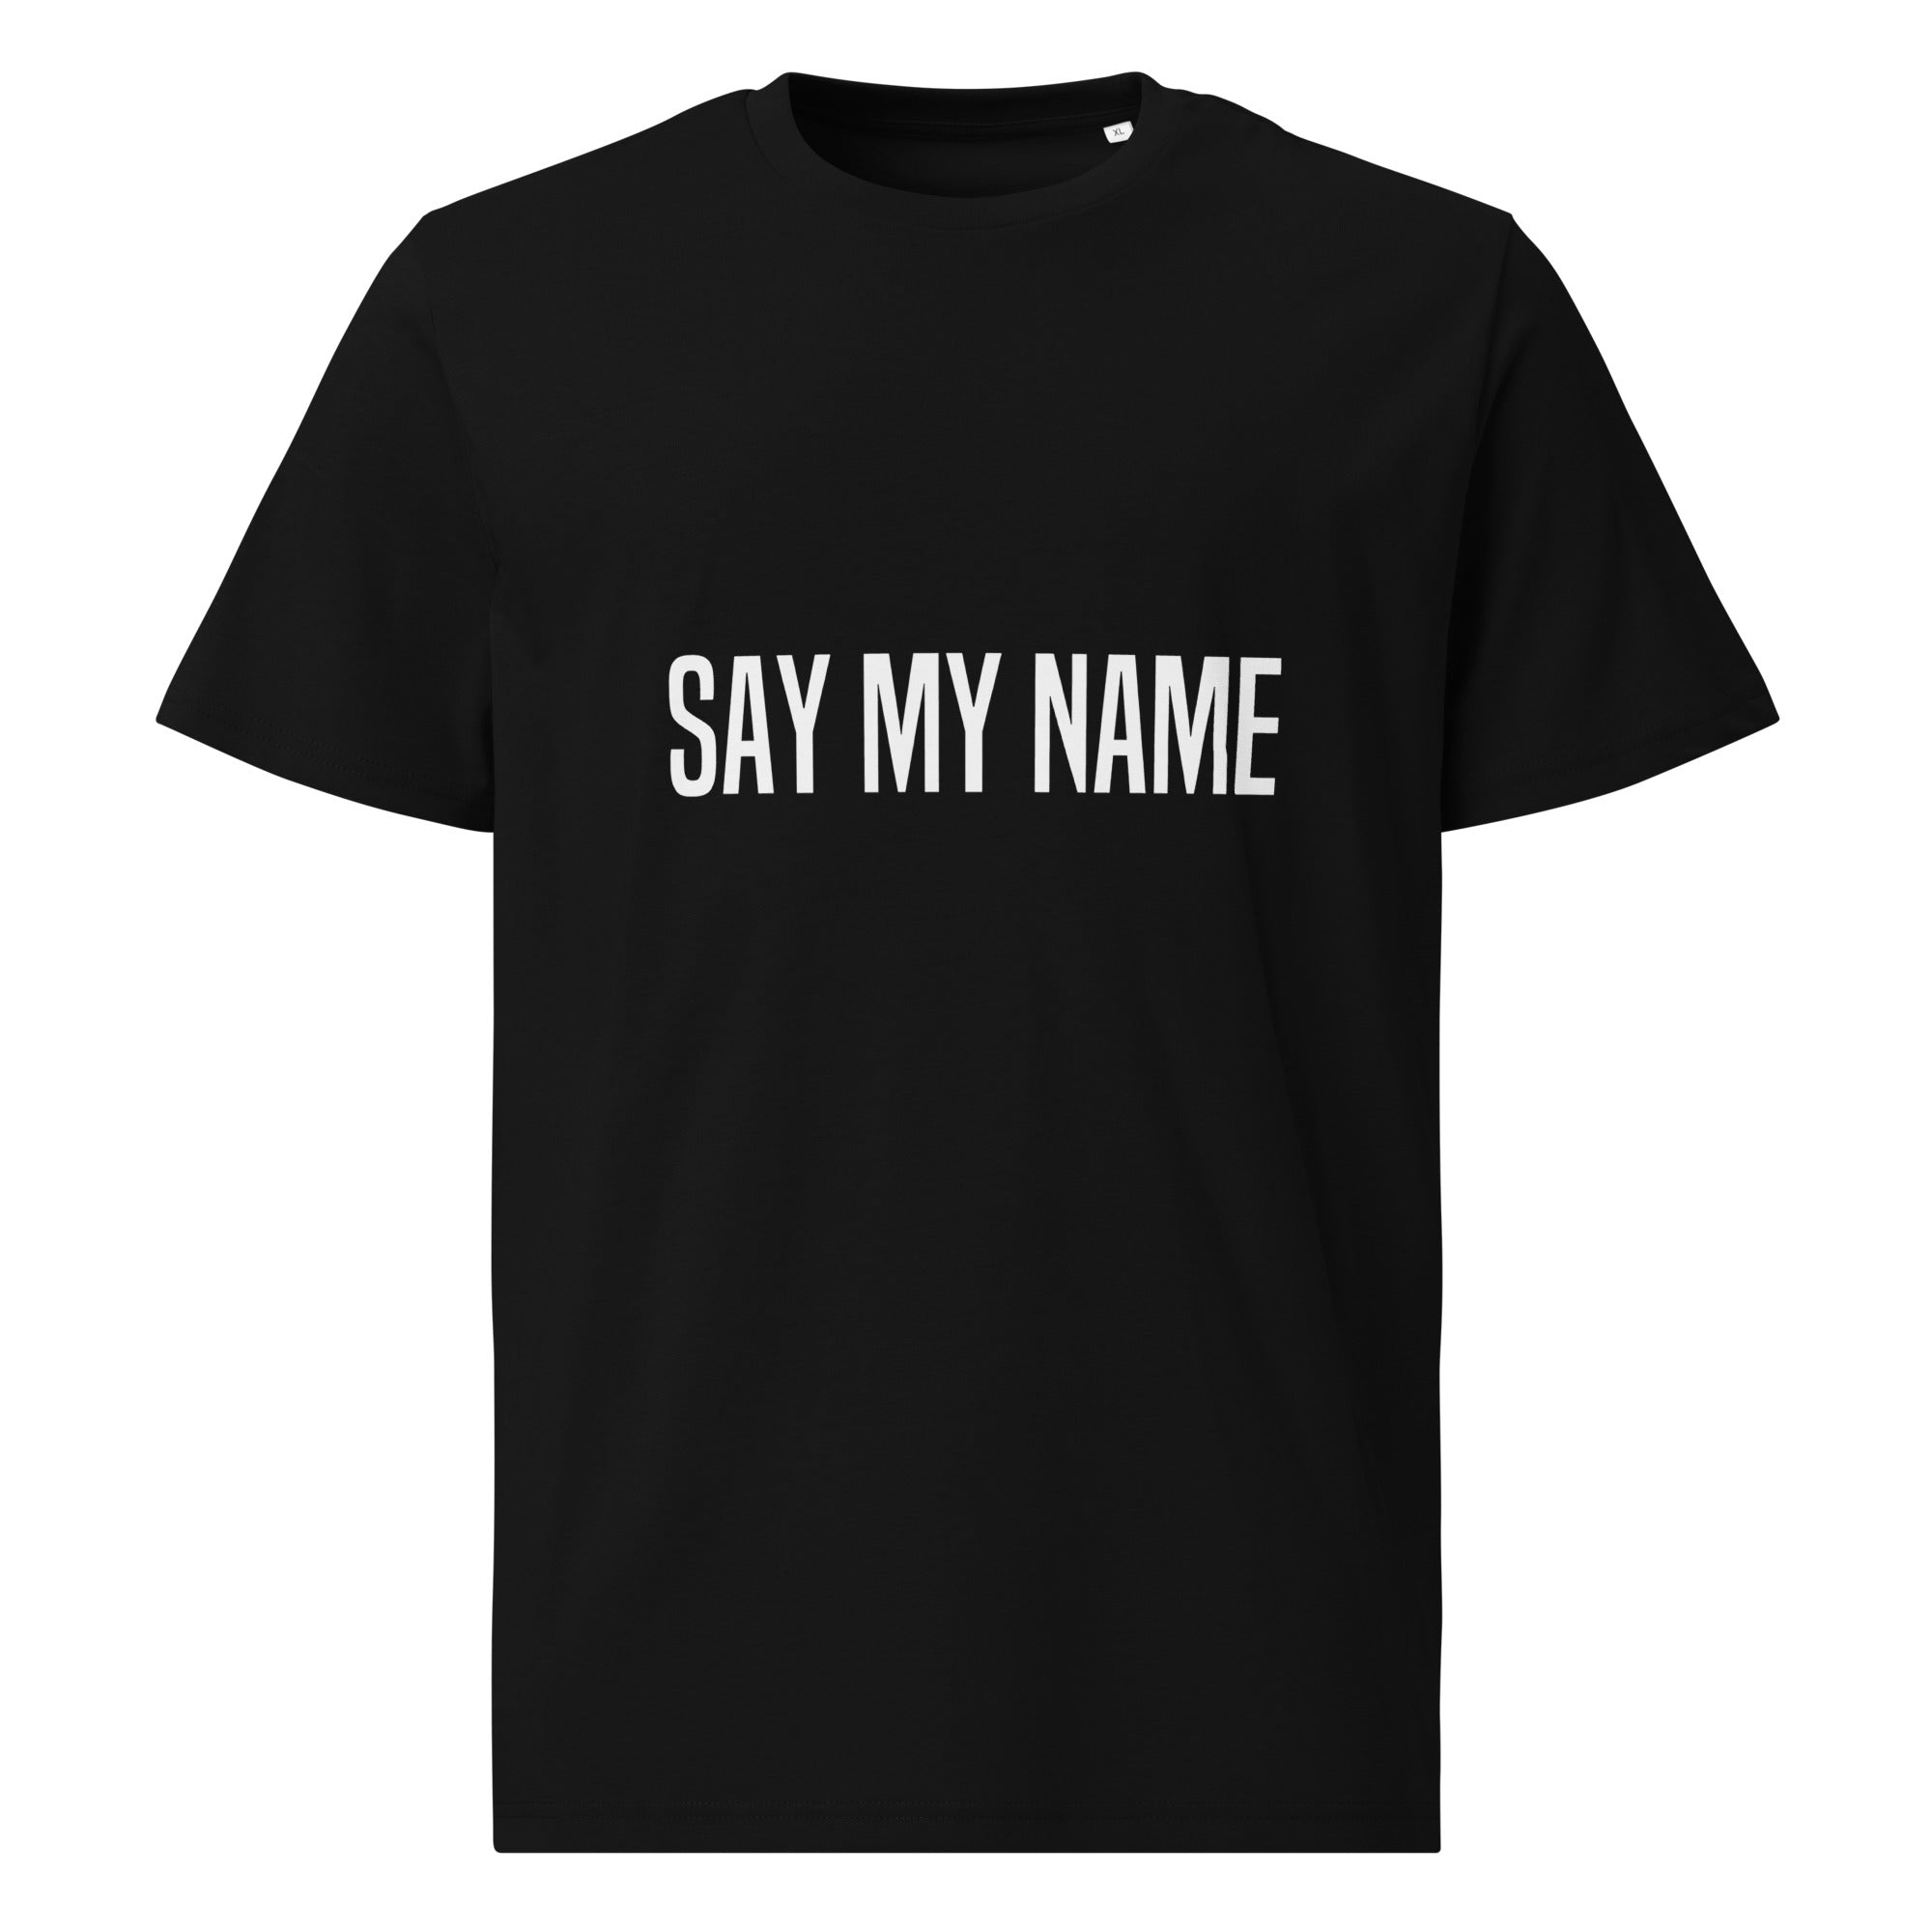 CSG unisex T-SHIRT “SAY MY NAME” wit